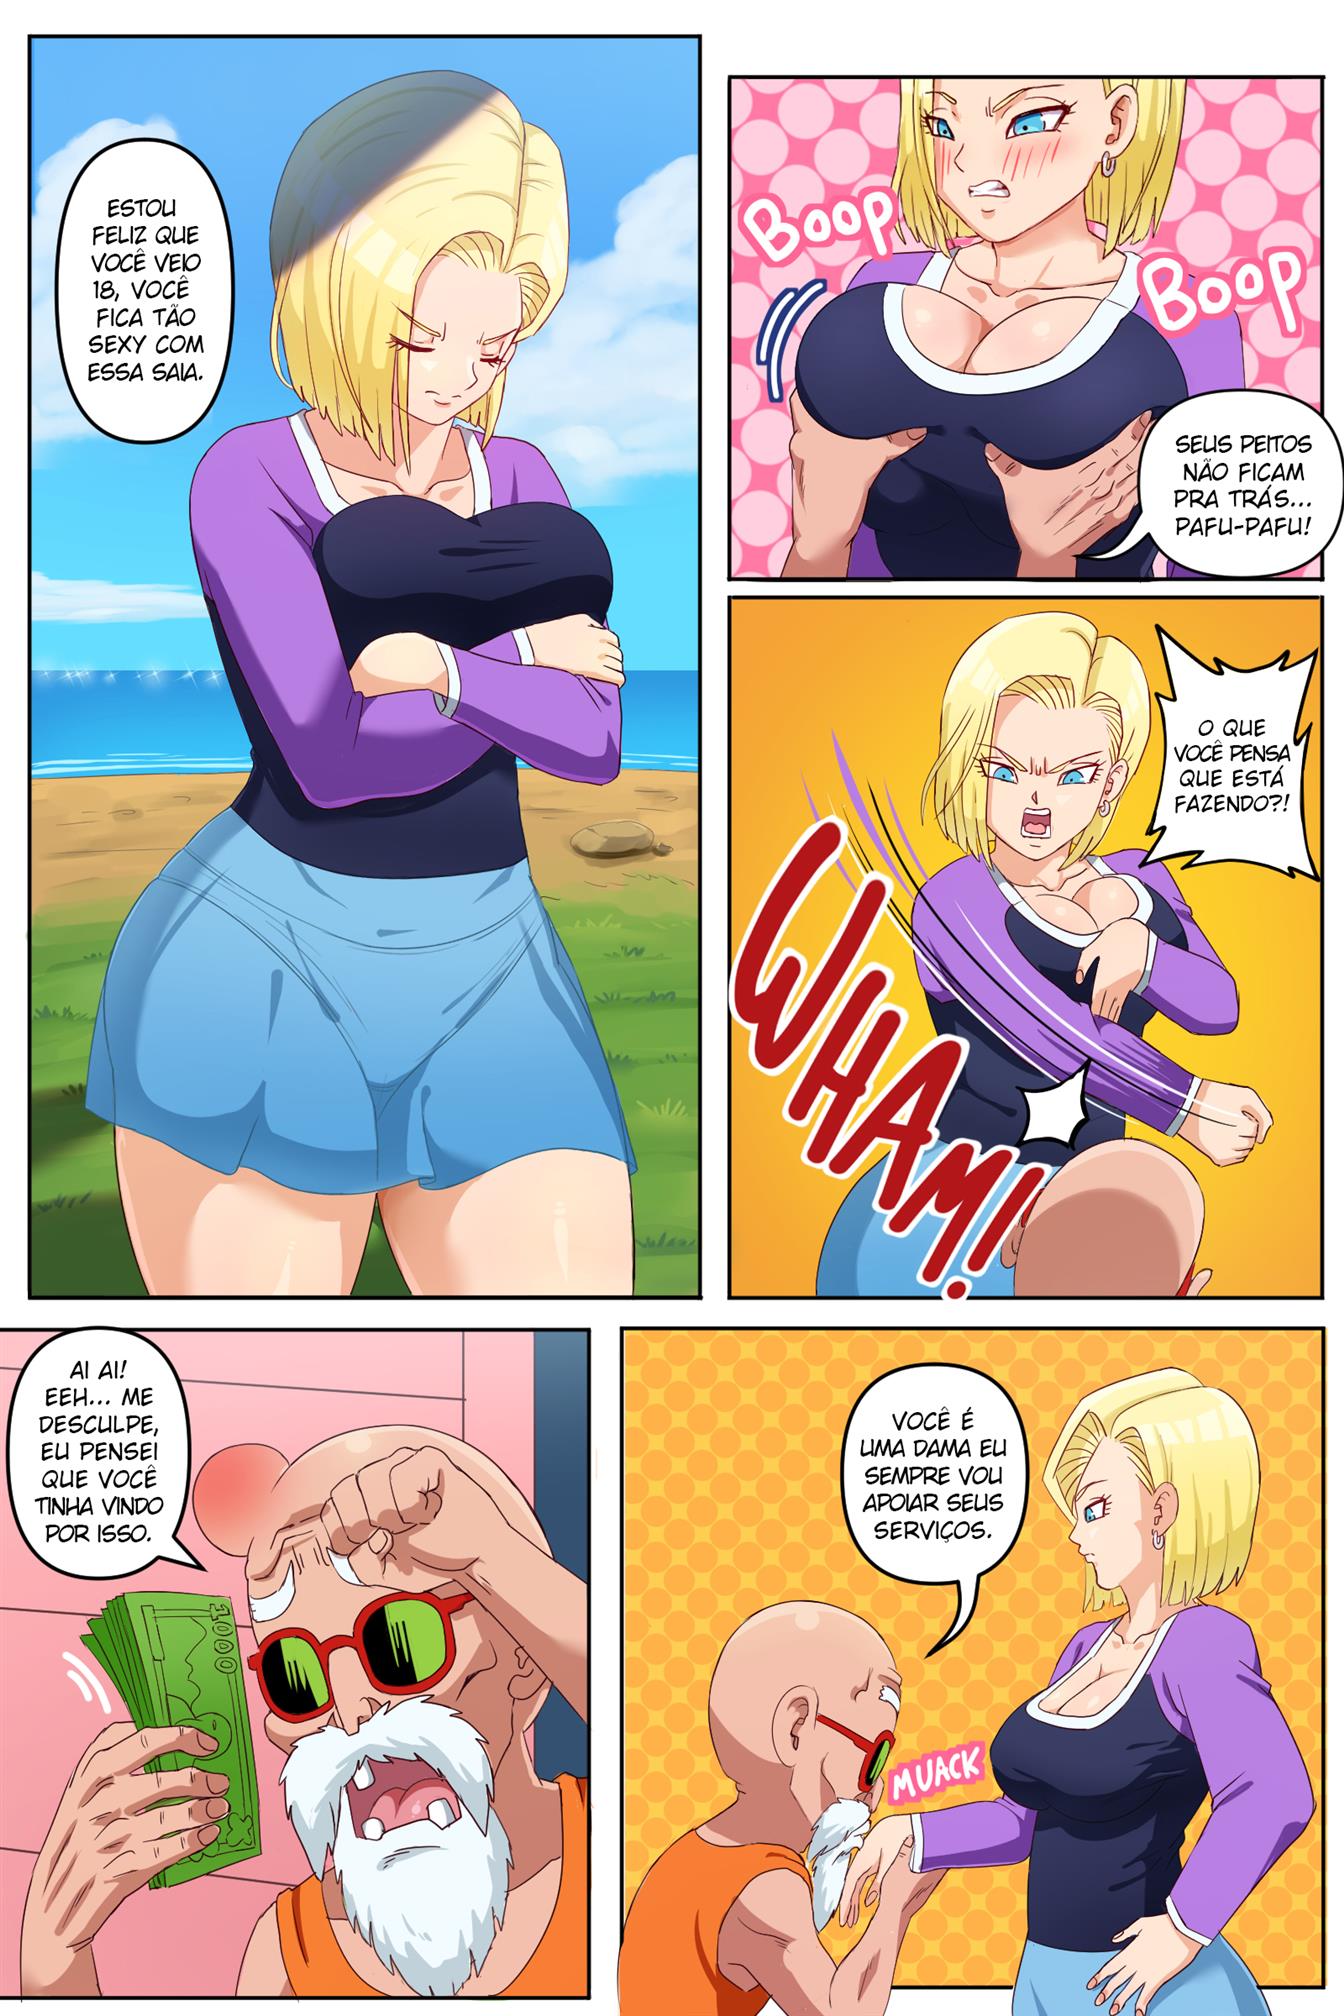 Android 18 NTR Ep.1